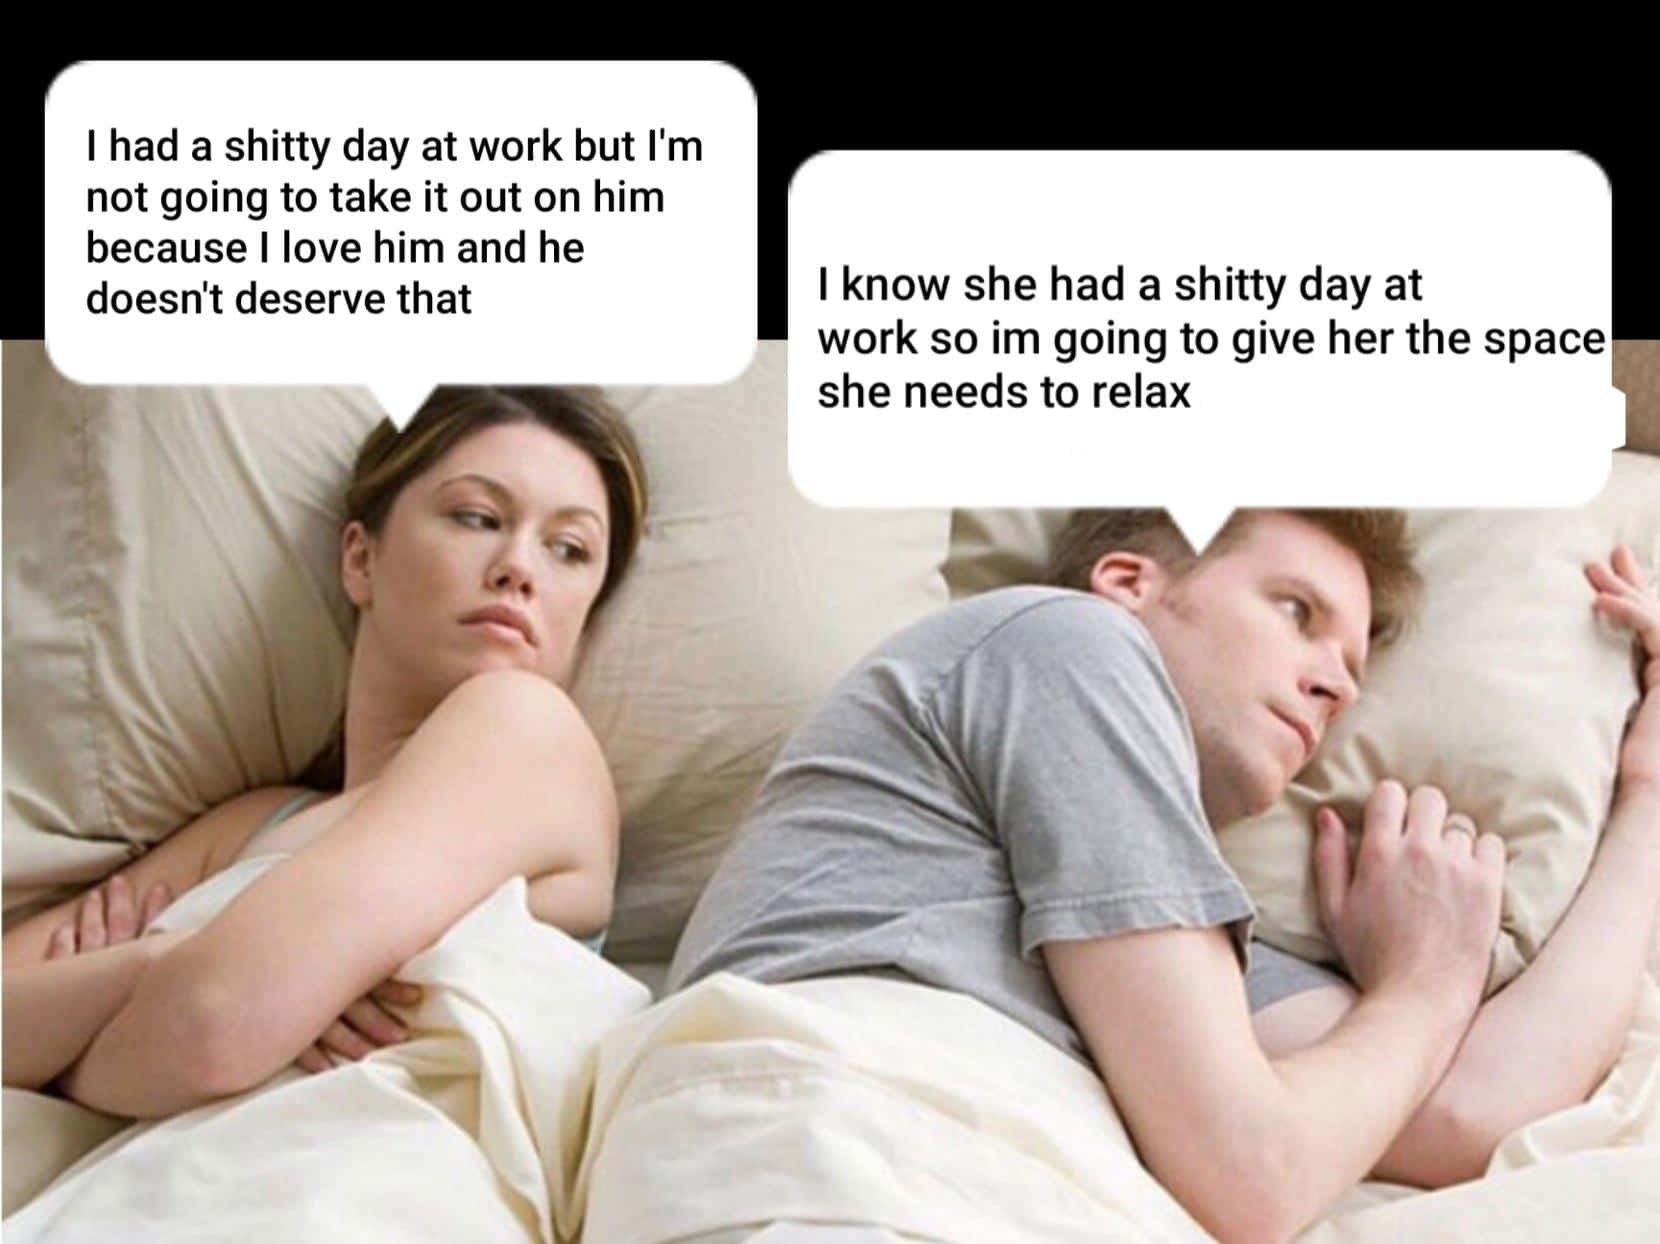 Wholesome memes,  Wholesome Memes Wholesome memes,  text: I had a shitty day at work but I'm not going to take it out on him because I love him and he doesn't deserve that I know she had a shitty day at work so im going to give her the space she needs to relax 